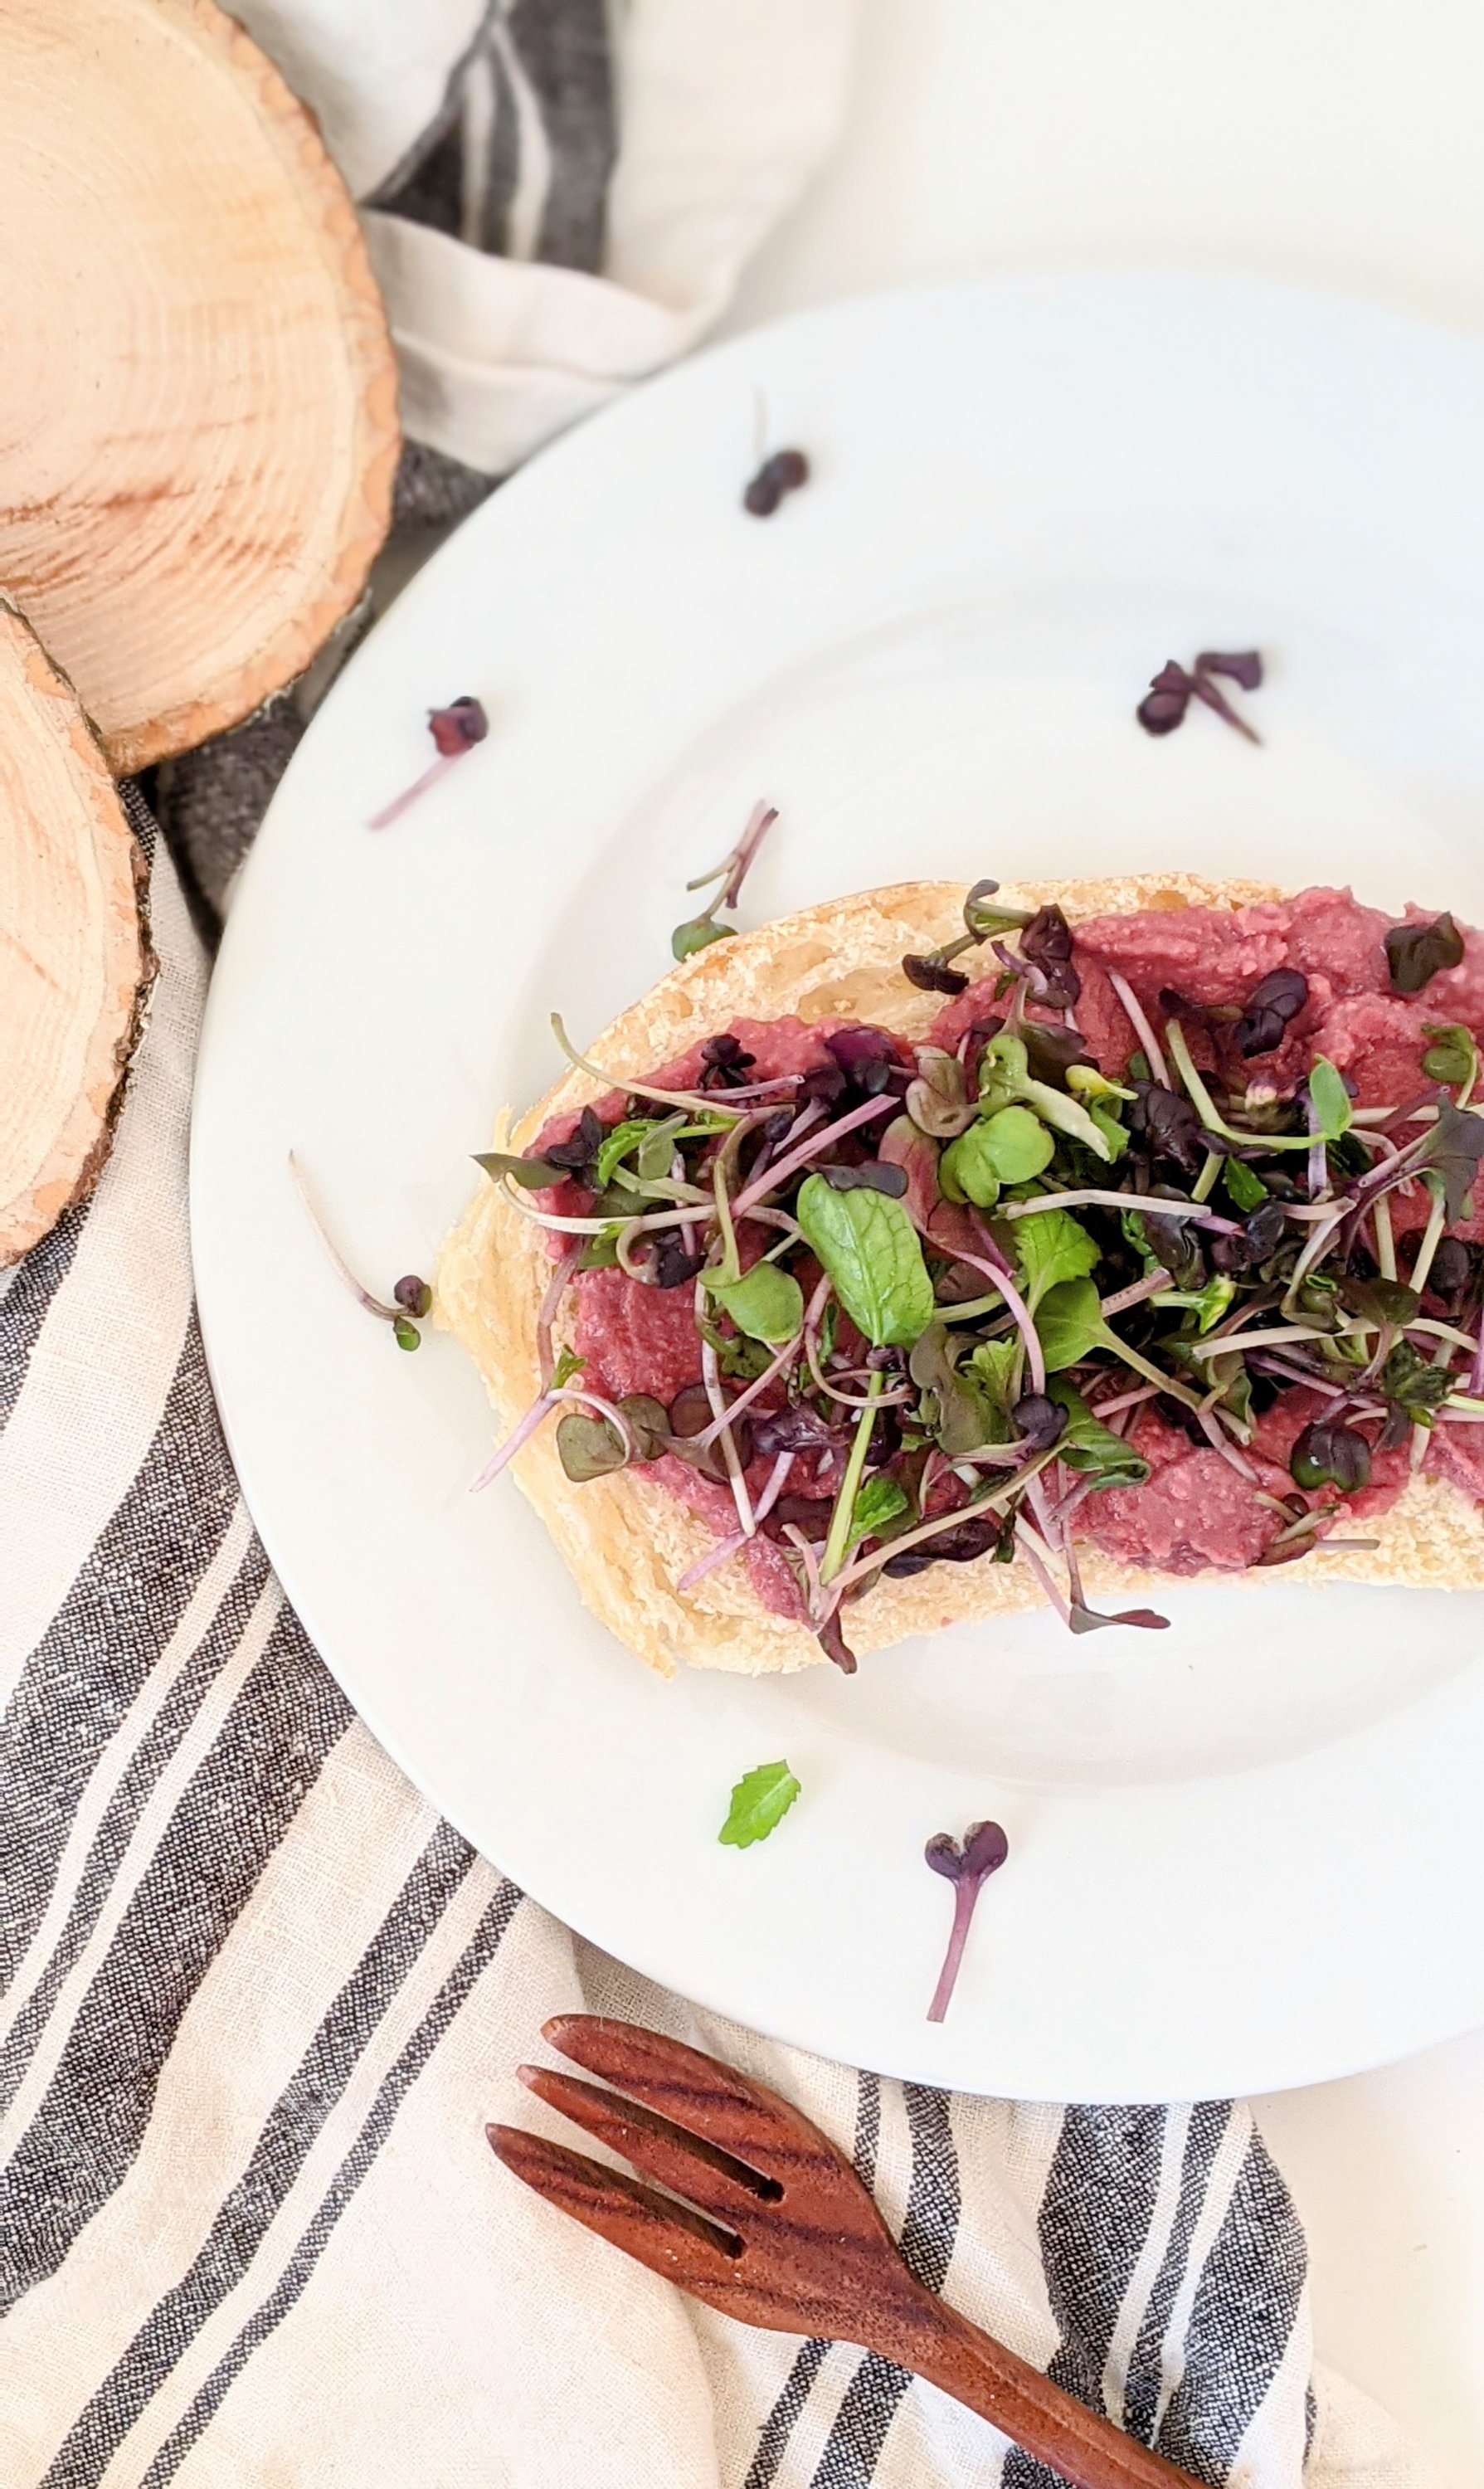 beet hummus tartine recipe open faced sandwich with beet hummus and microgreens healthy sprouts and beets sandwich vegan gluten free breakfast or snack or light lunch tartines